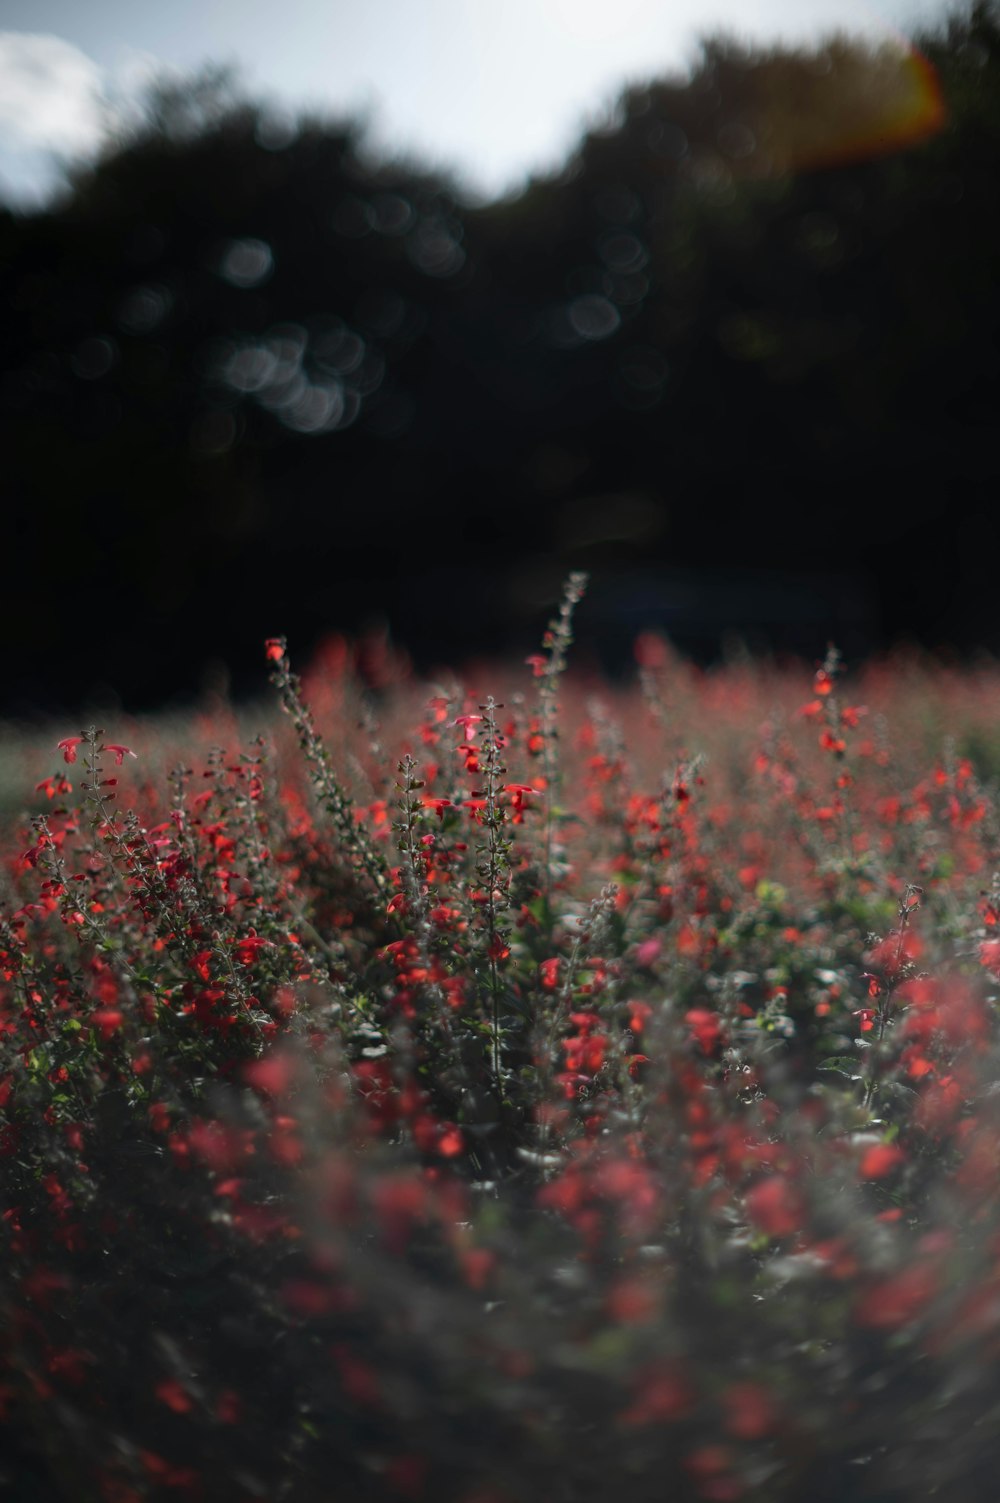 a field full of red flowers on a sunny day